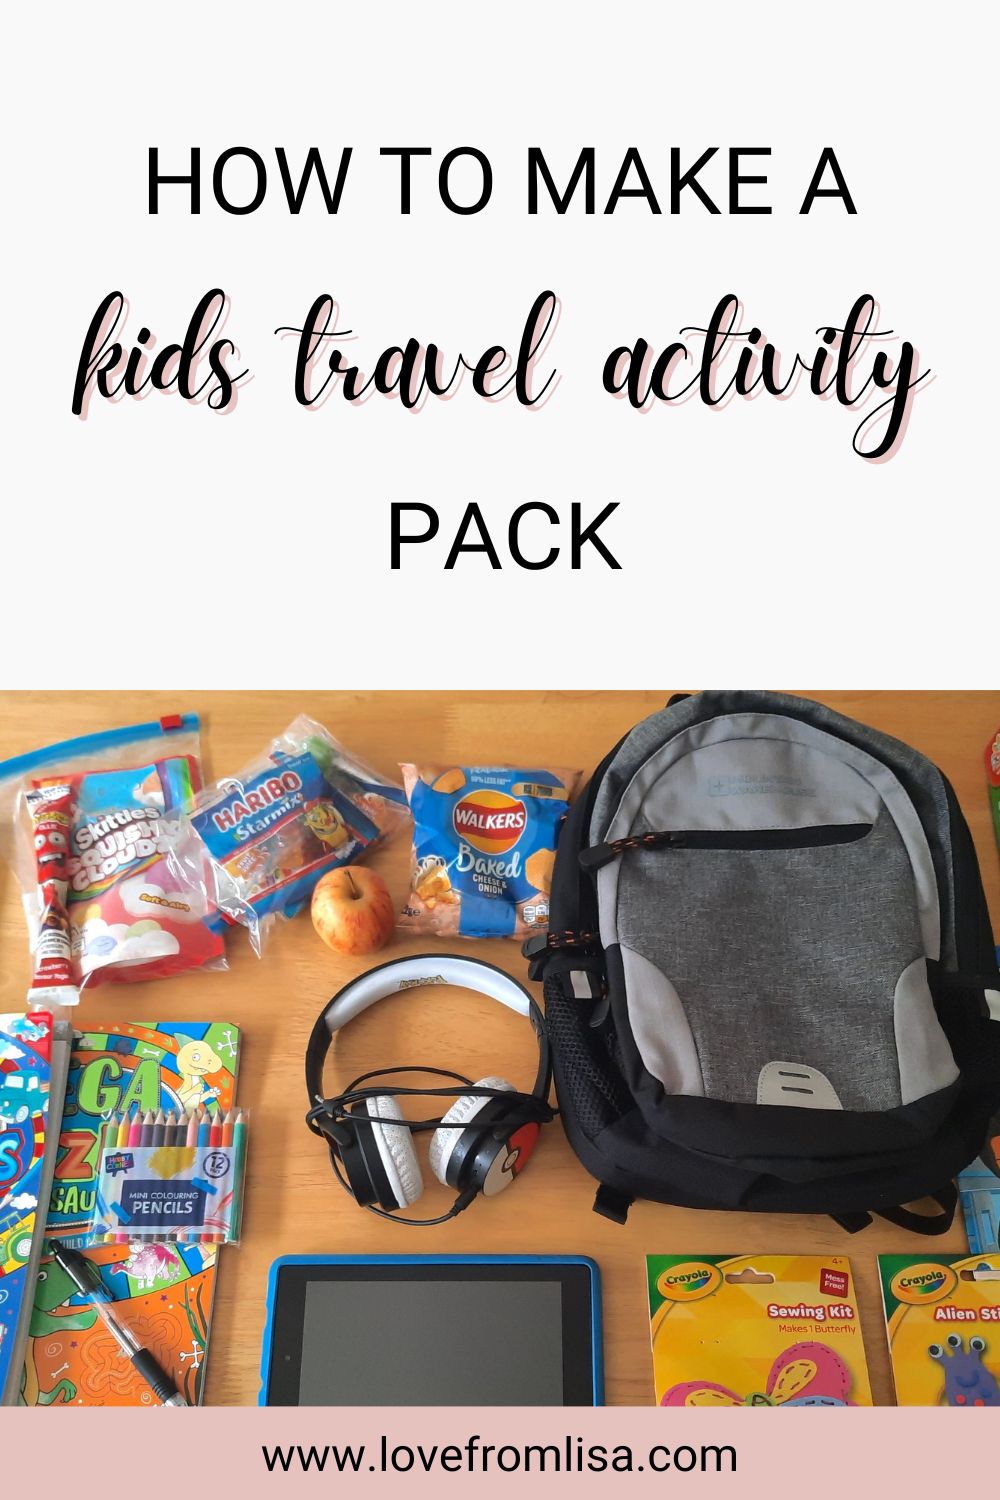 How to make a kids travel activity pack Pinterest